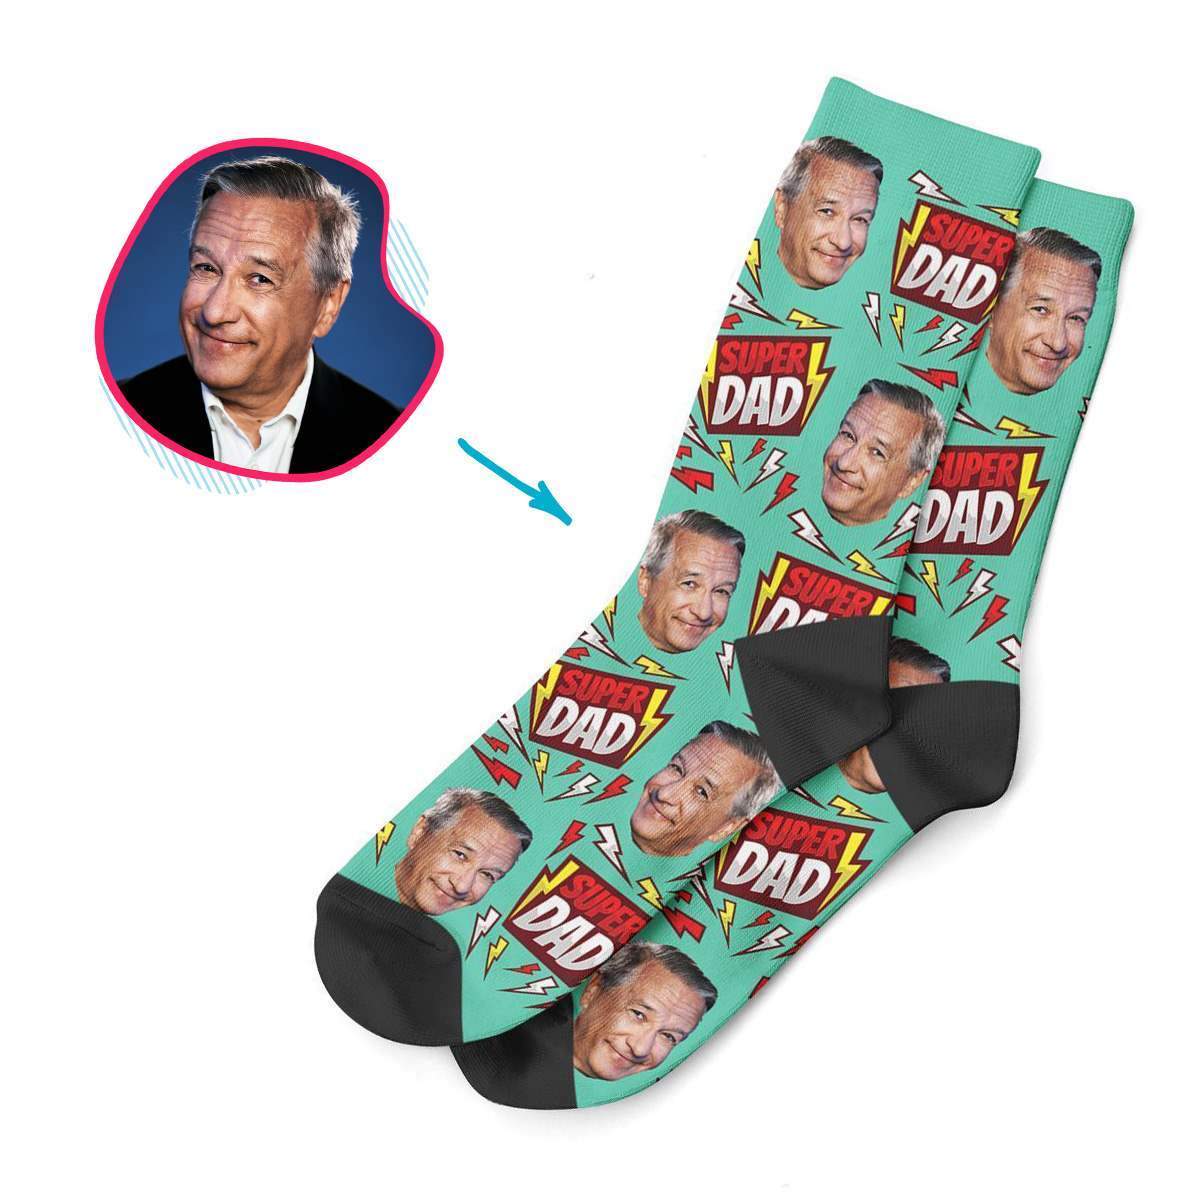 mint Super Dad socks personalized with photo of face printed on them